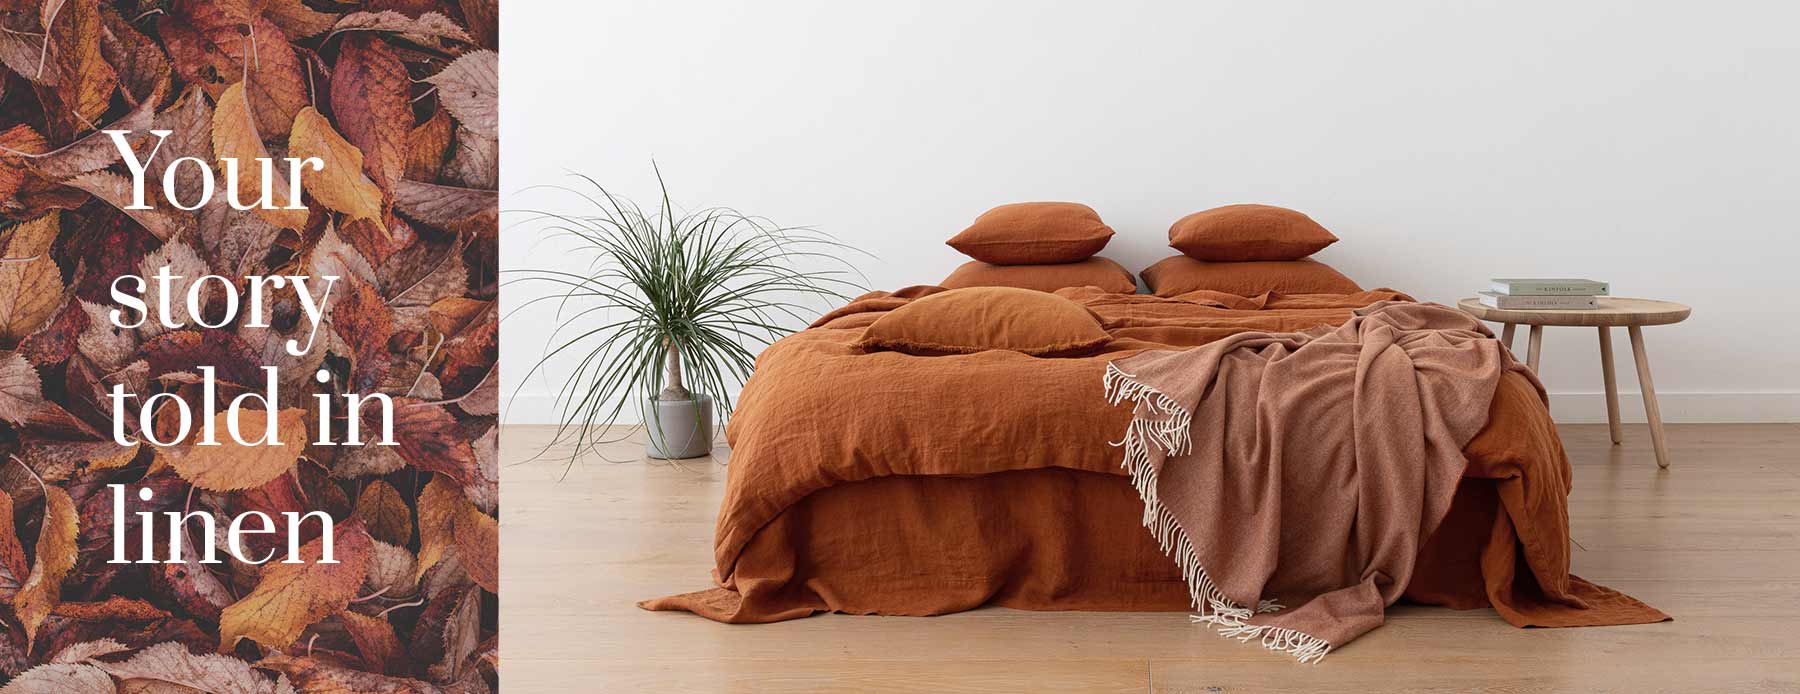 linenme bedding